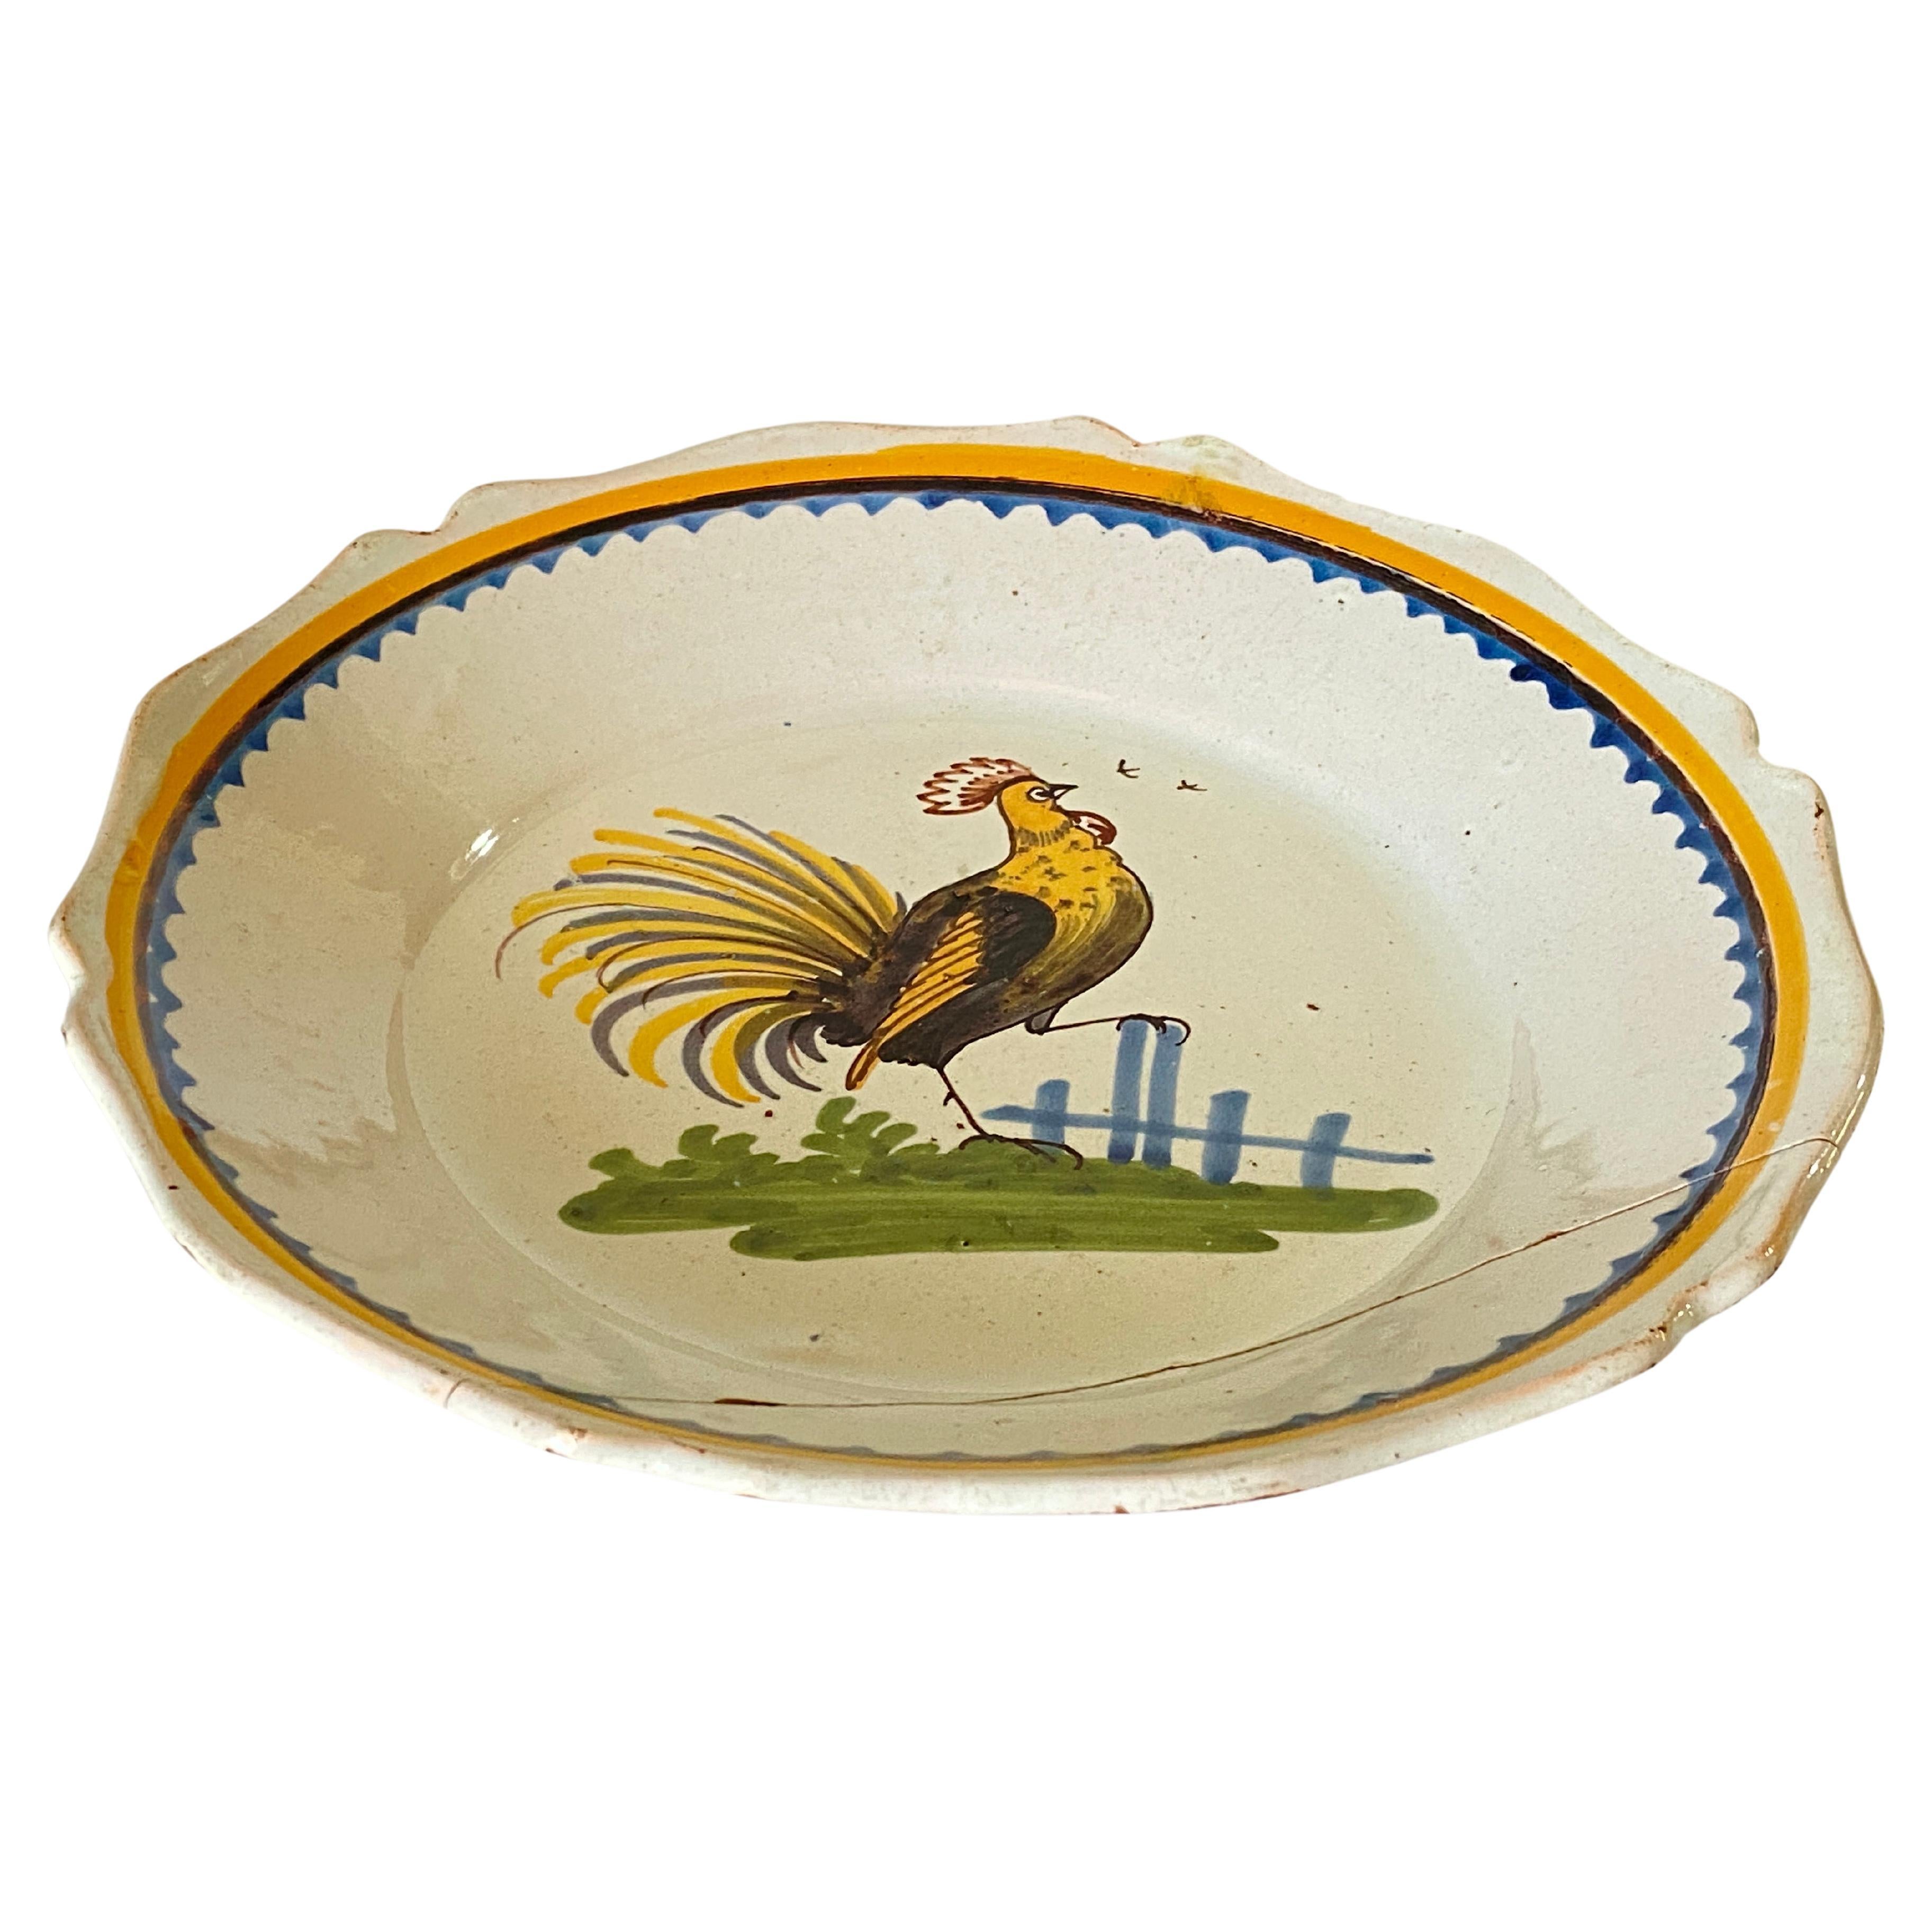 Quimper Faïence Plate, France 18th Century For Sale